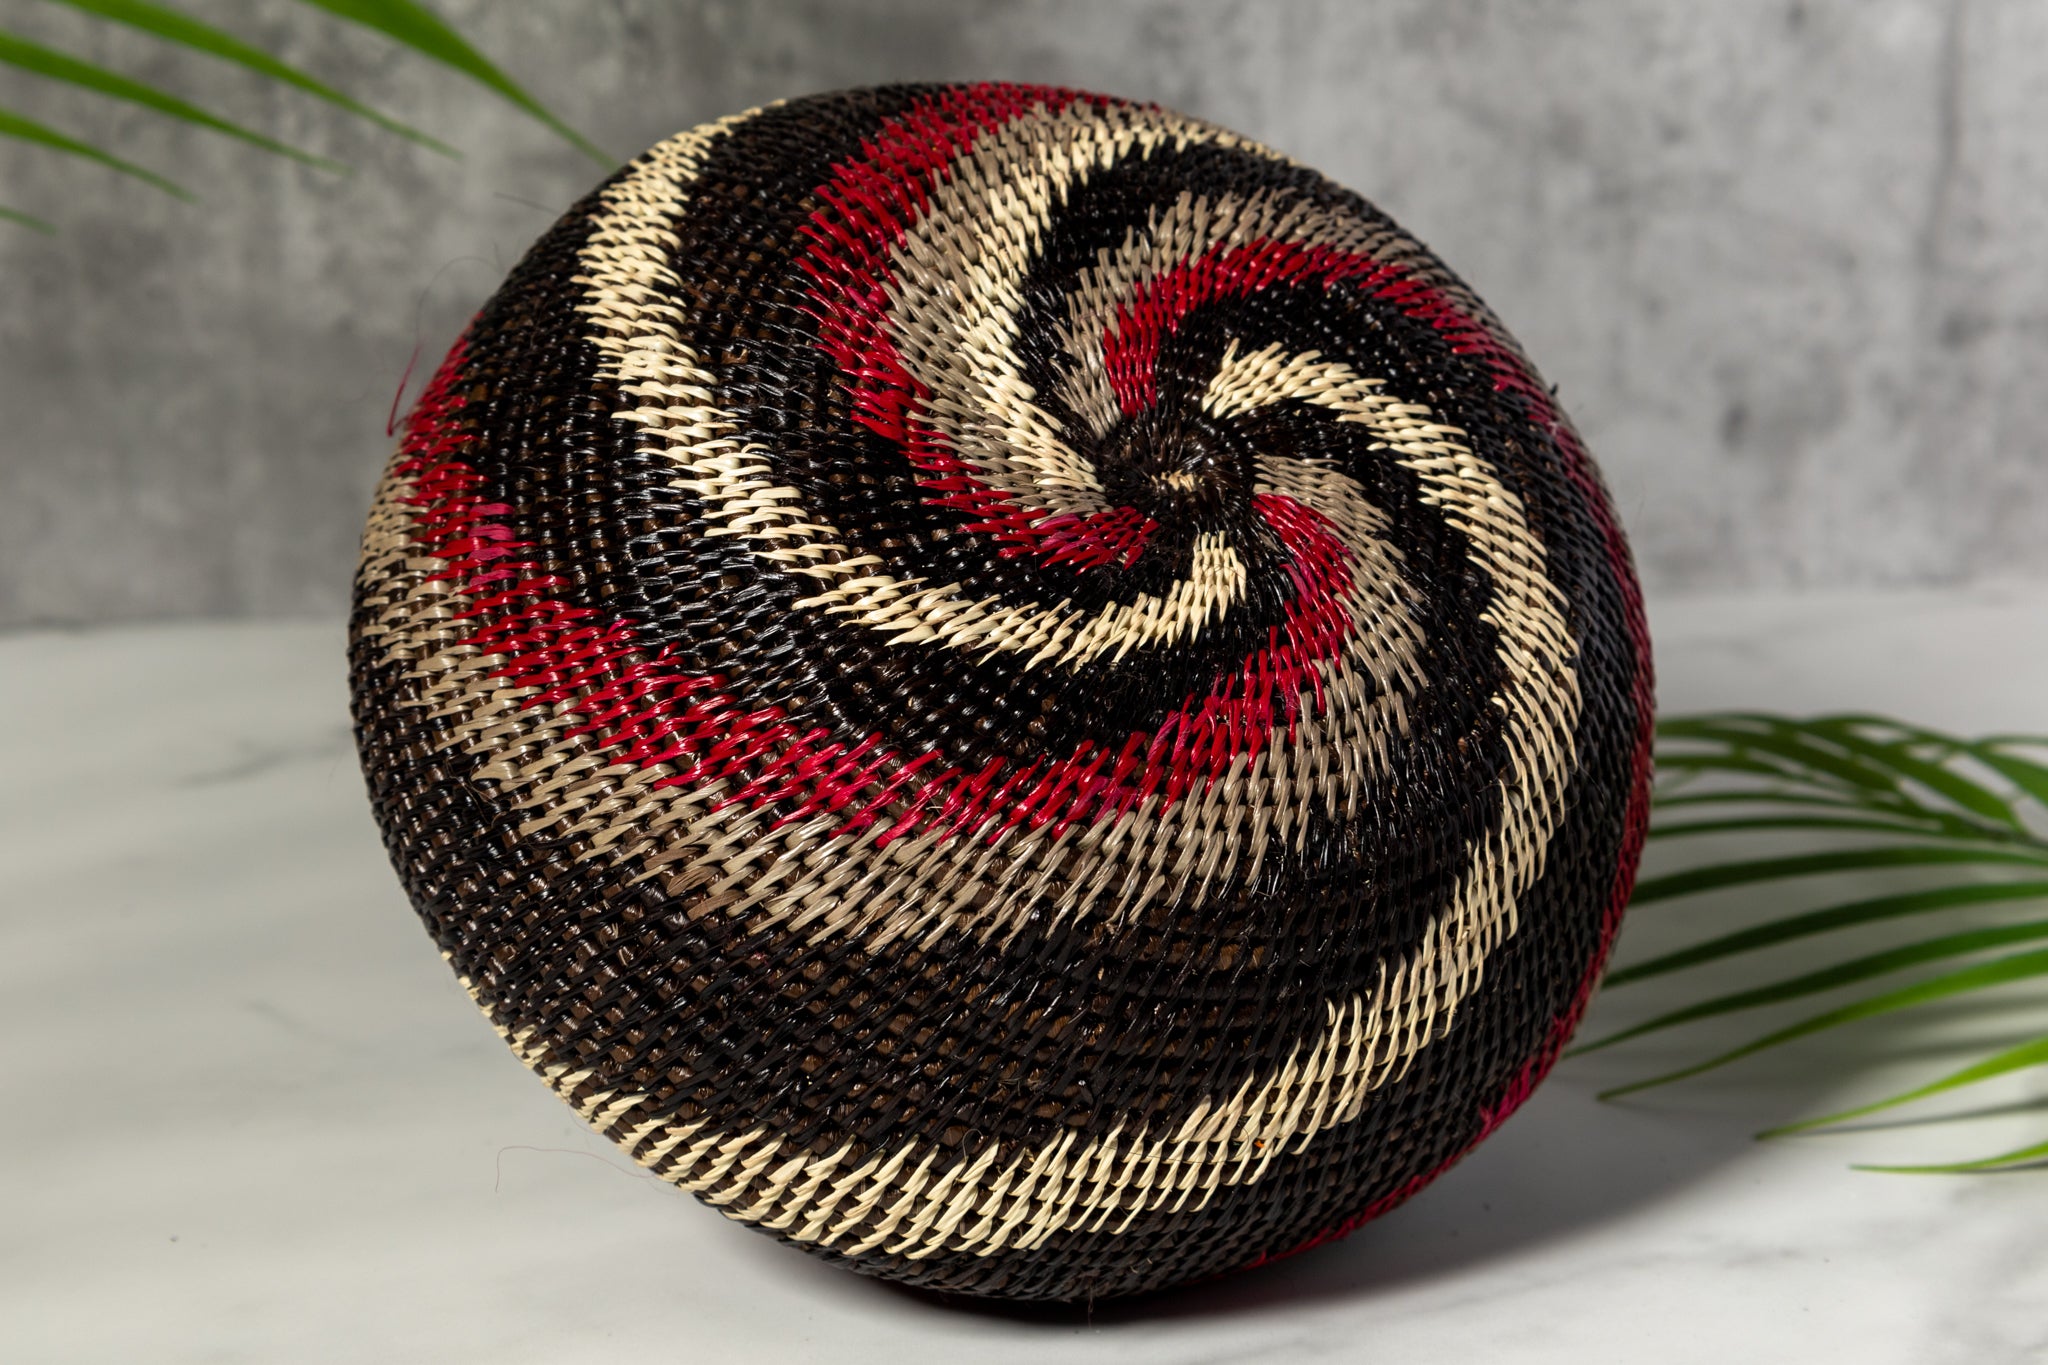 Black White And Red Spiral Woven Basket